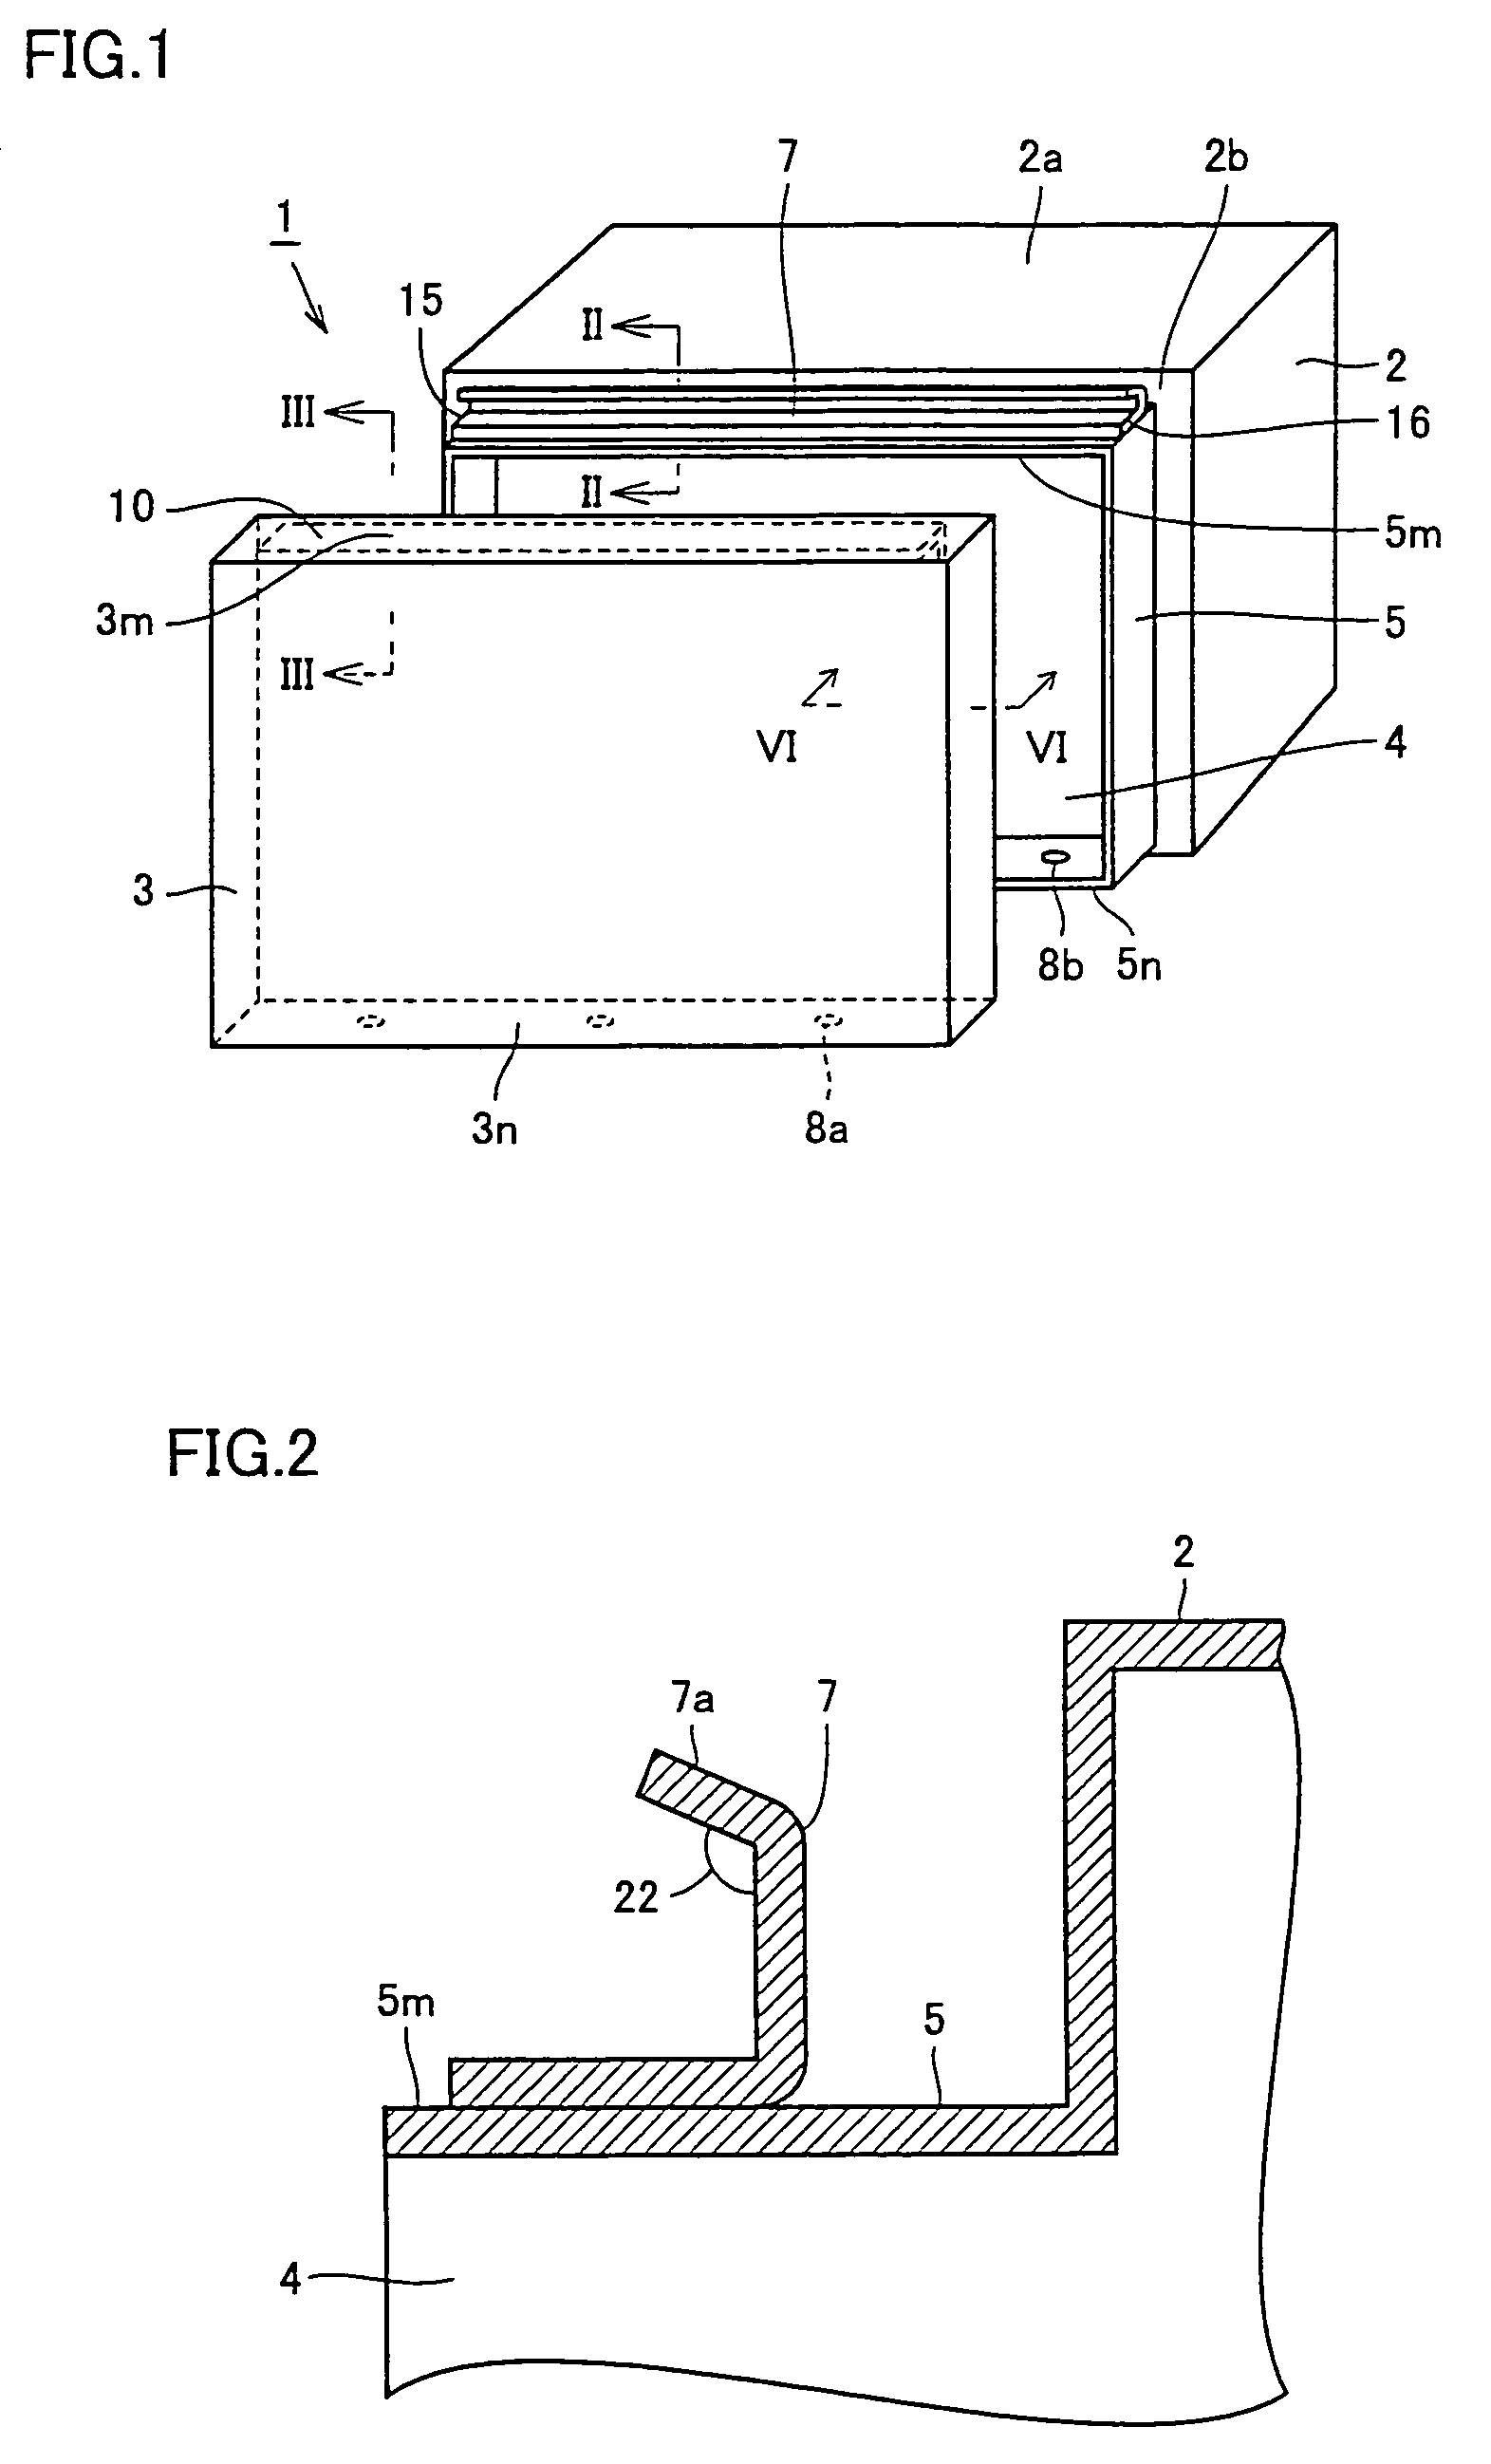 Outdoor-installed power conditioner device